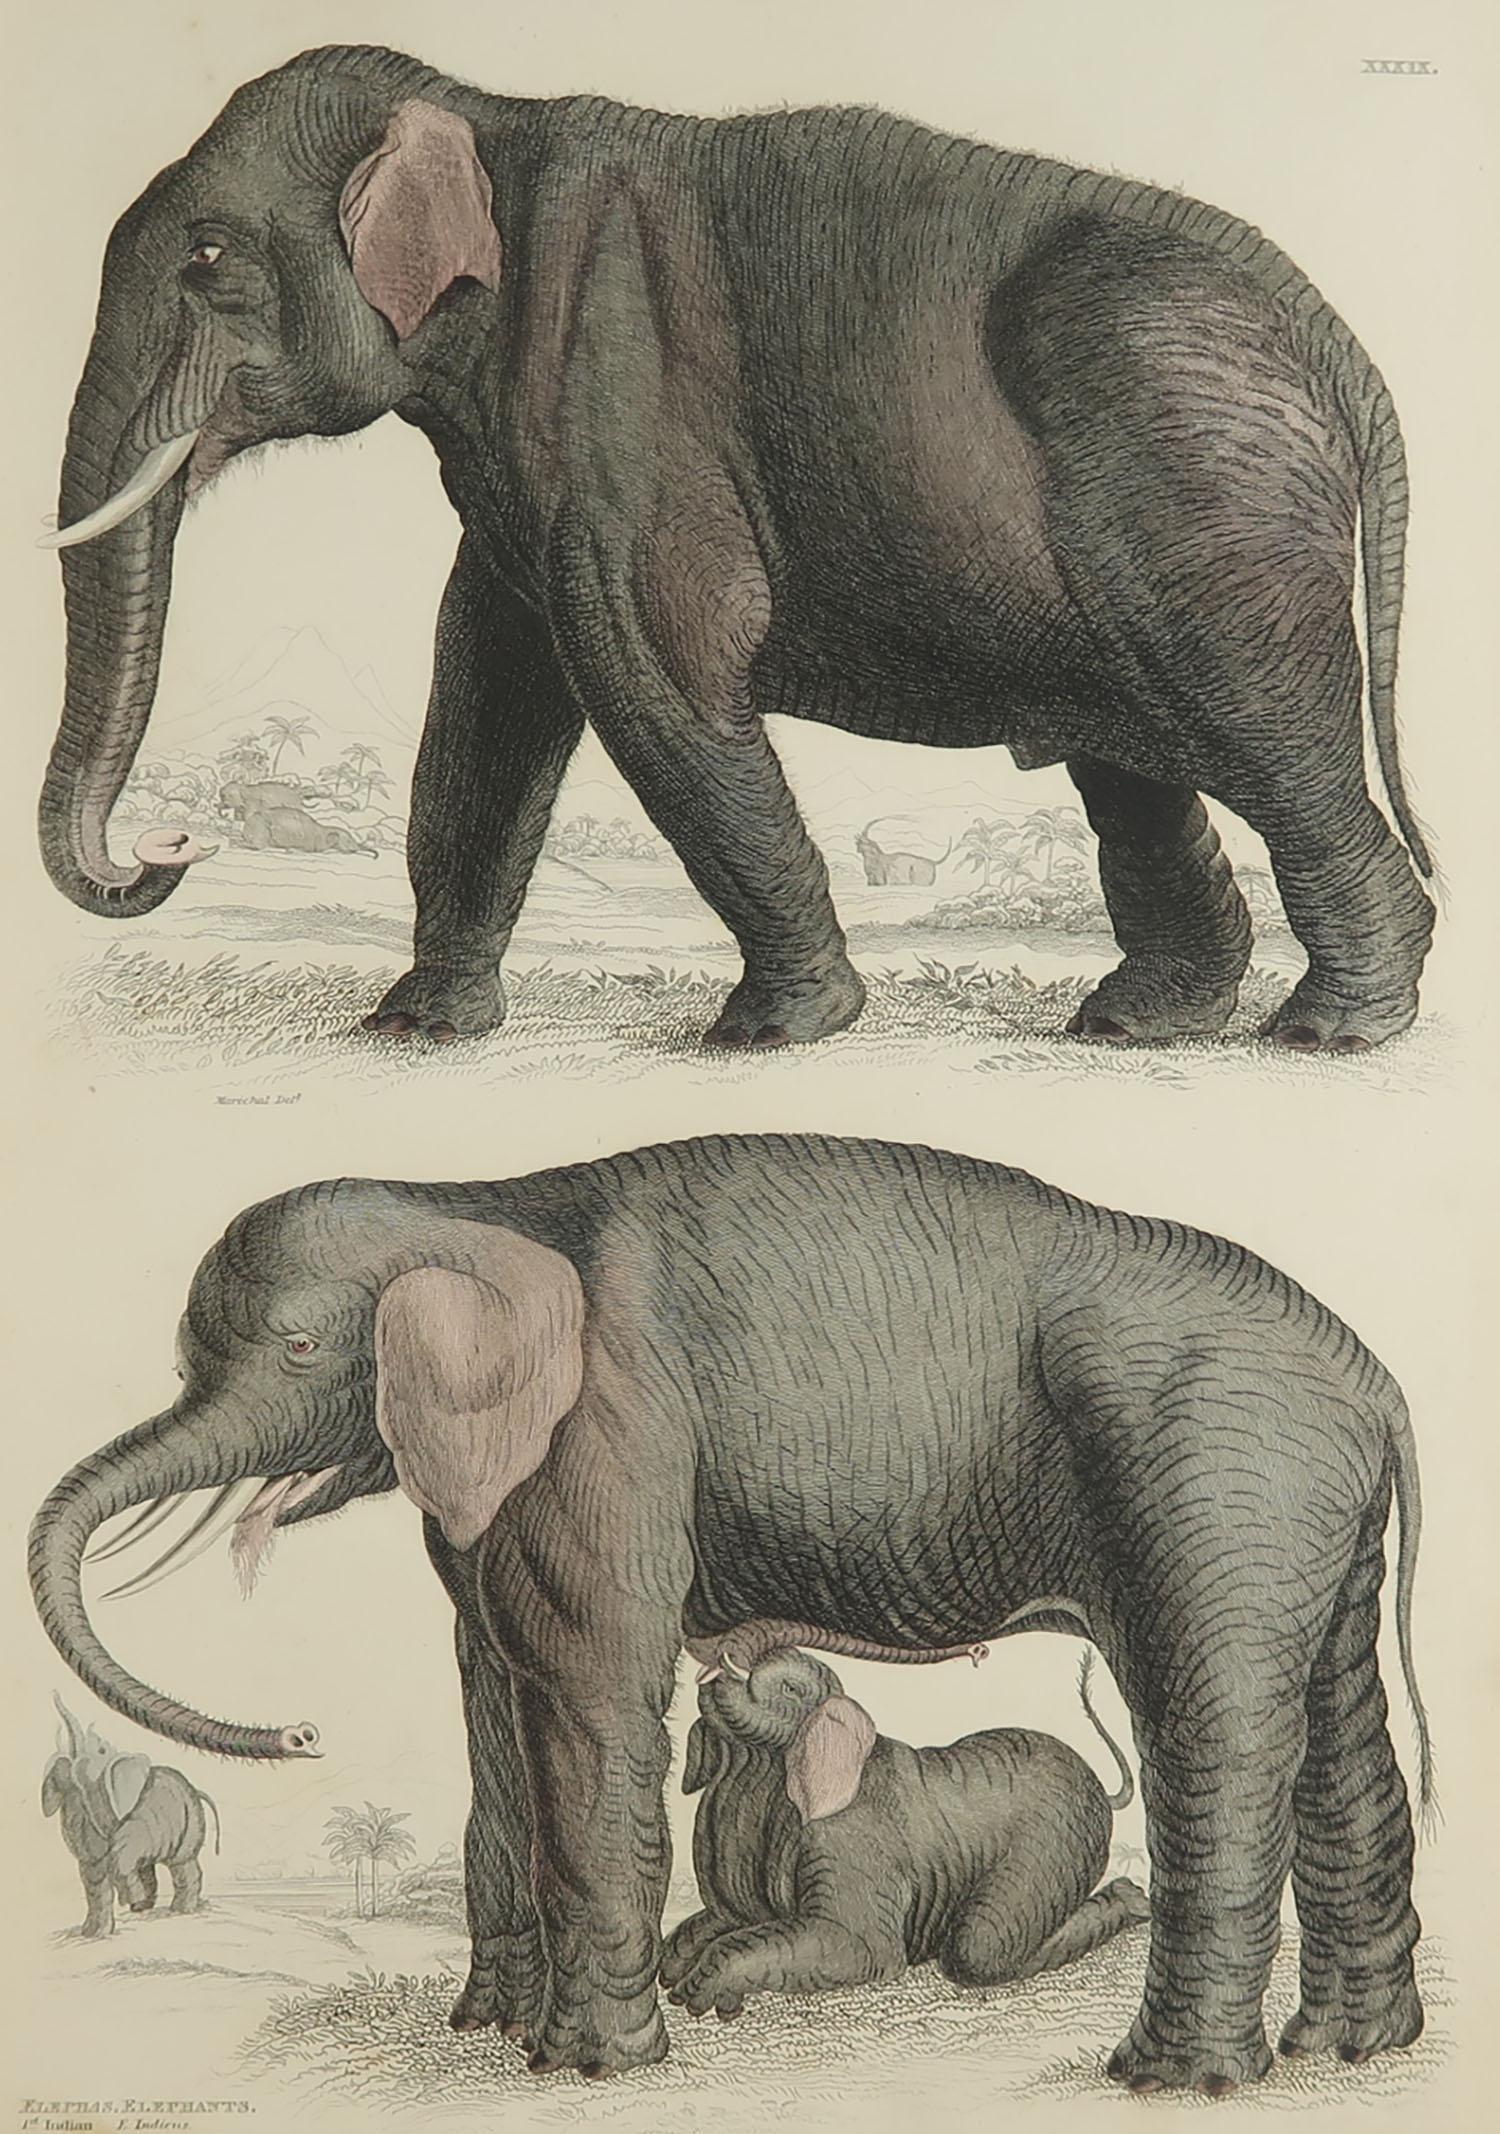 Great image of an Indian and an African elephant

Unframed. It gives you the option of perhaps making a set up using your own choice of frames.

Lithograph after Cpt. Brown with original hand color.

Published circa 1835

Free